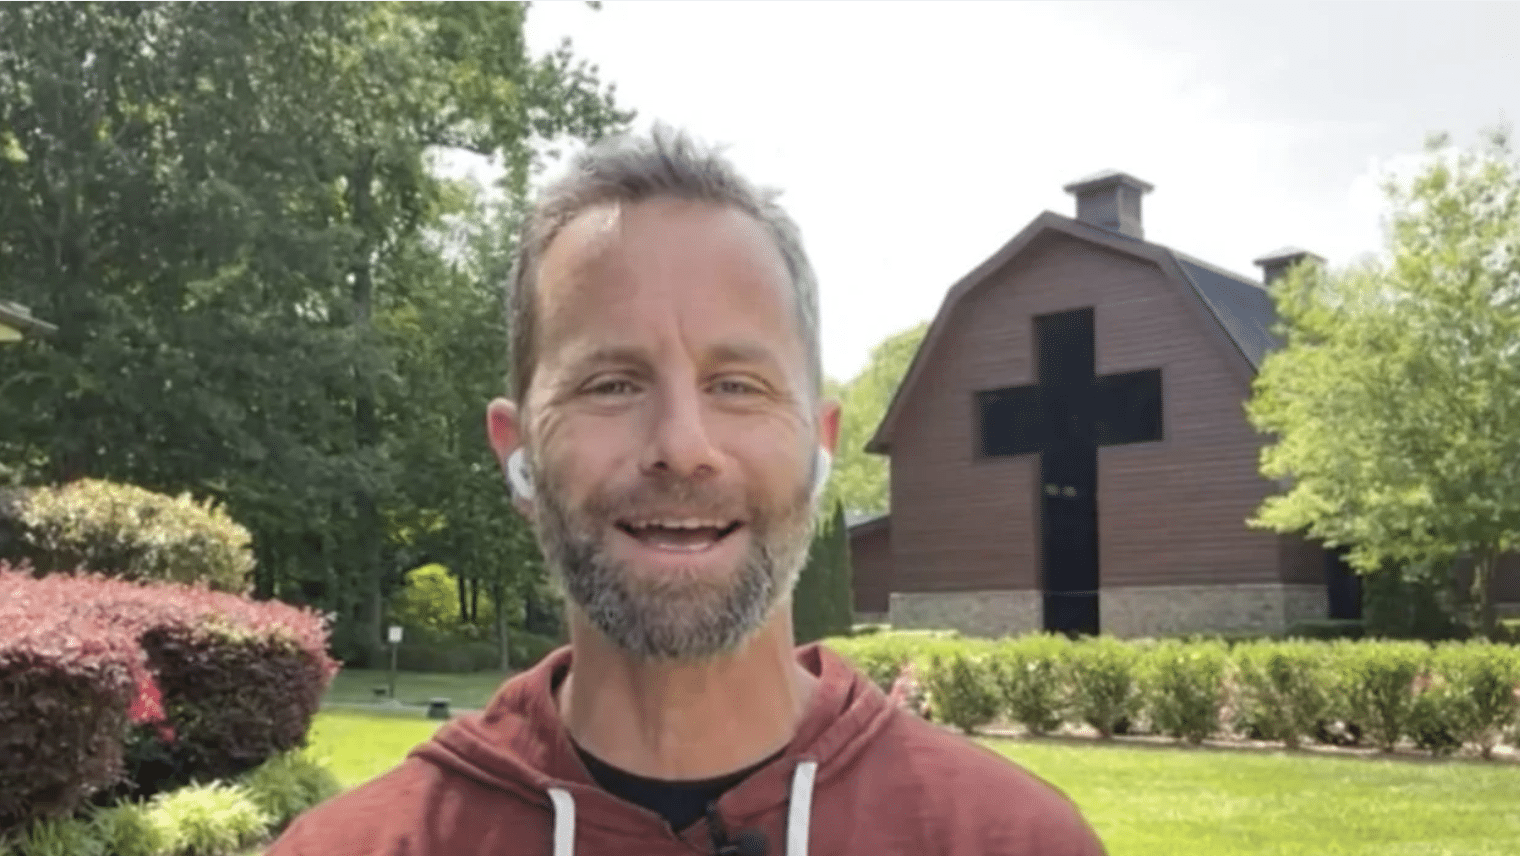 (WATCH) Kirk Cameron warns of ‘nefarious forces’ that want to destroy God and the traditional family